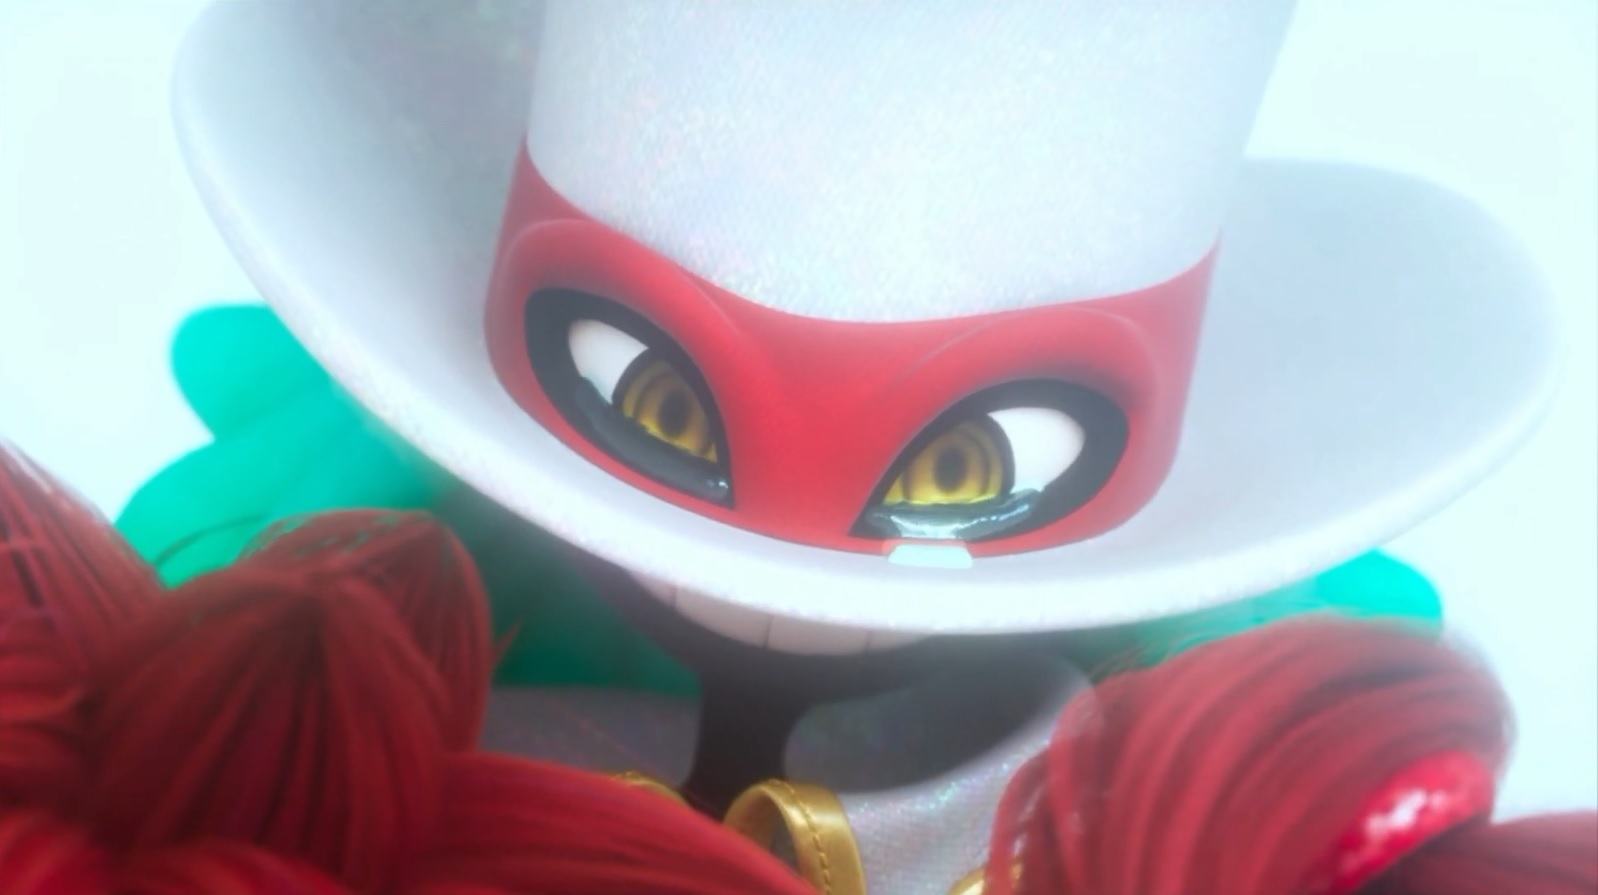 A screenshot from the game Balan Worldworld. A character with a white top hat and a red band as a face is mid-crying.